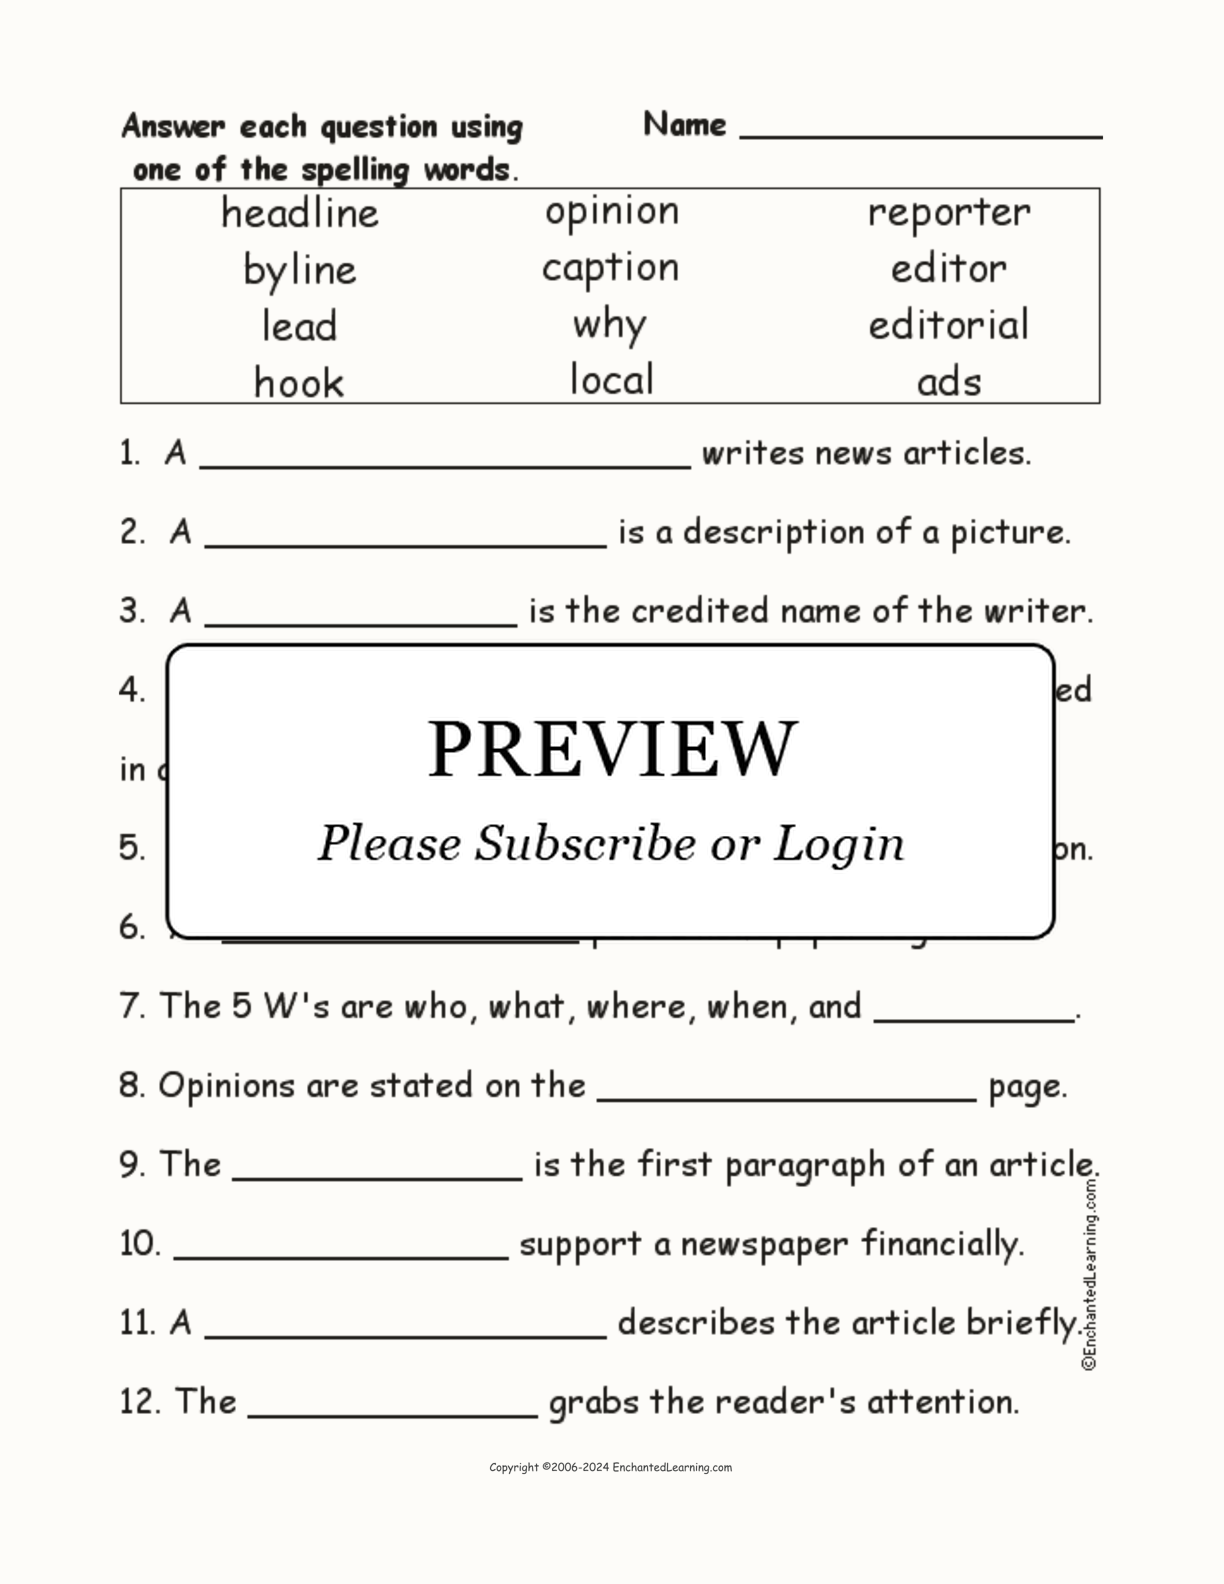 Newspaper Spelling Word Questions interactive worksheet page 1